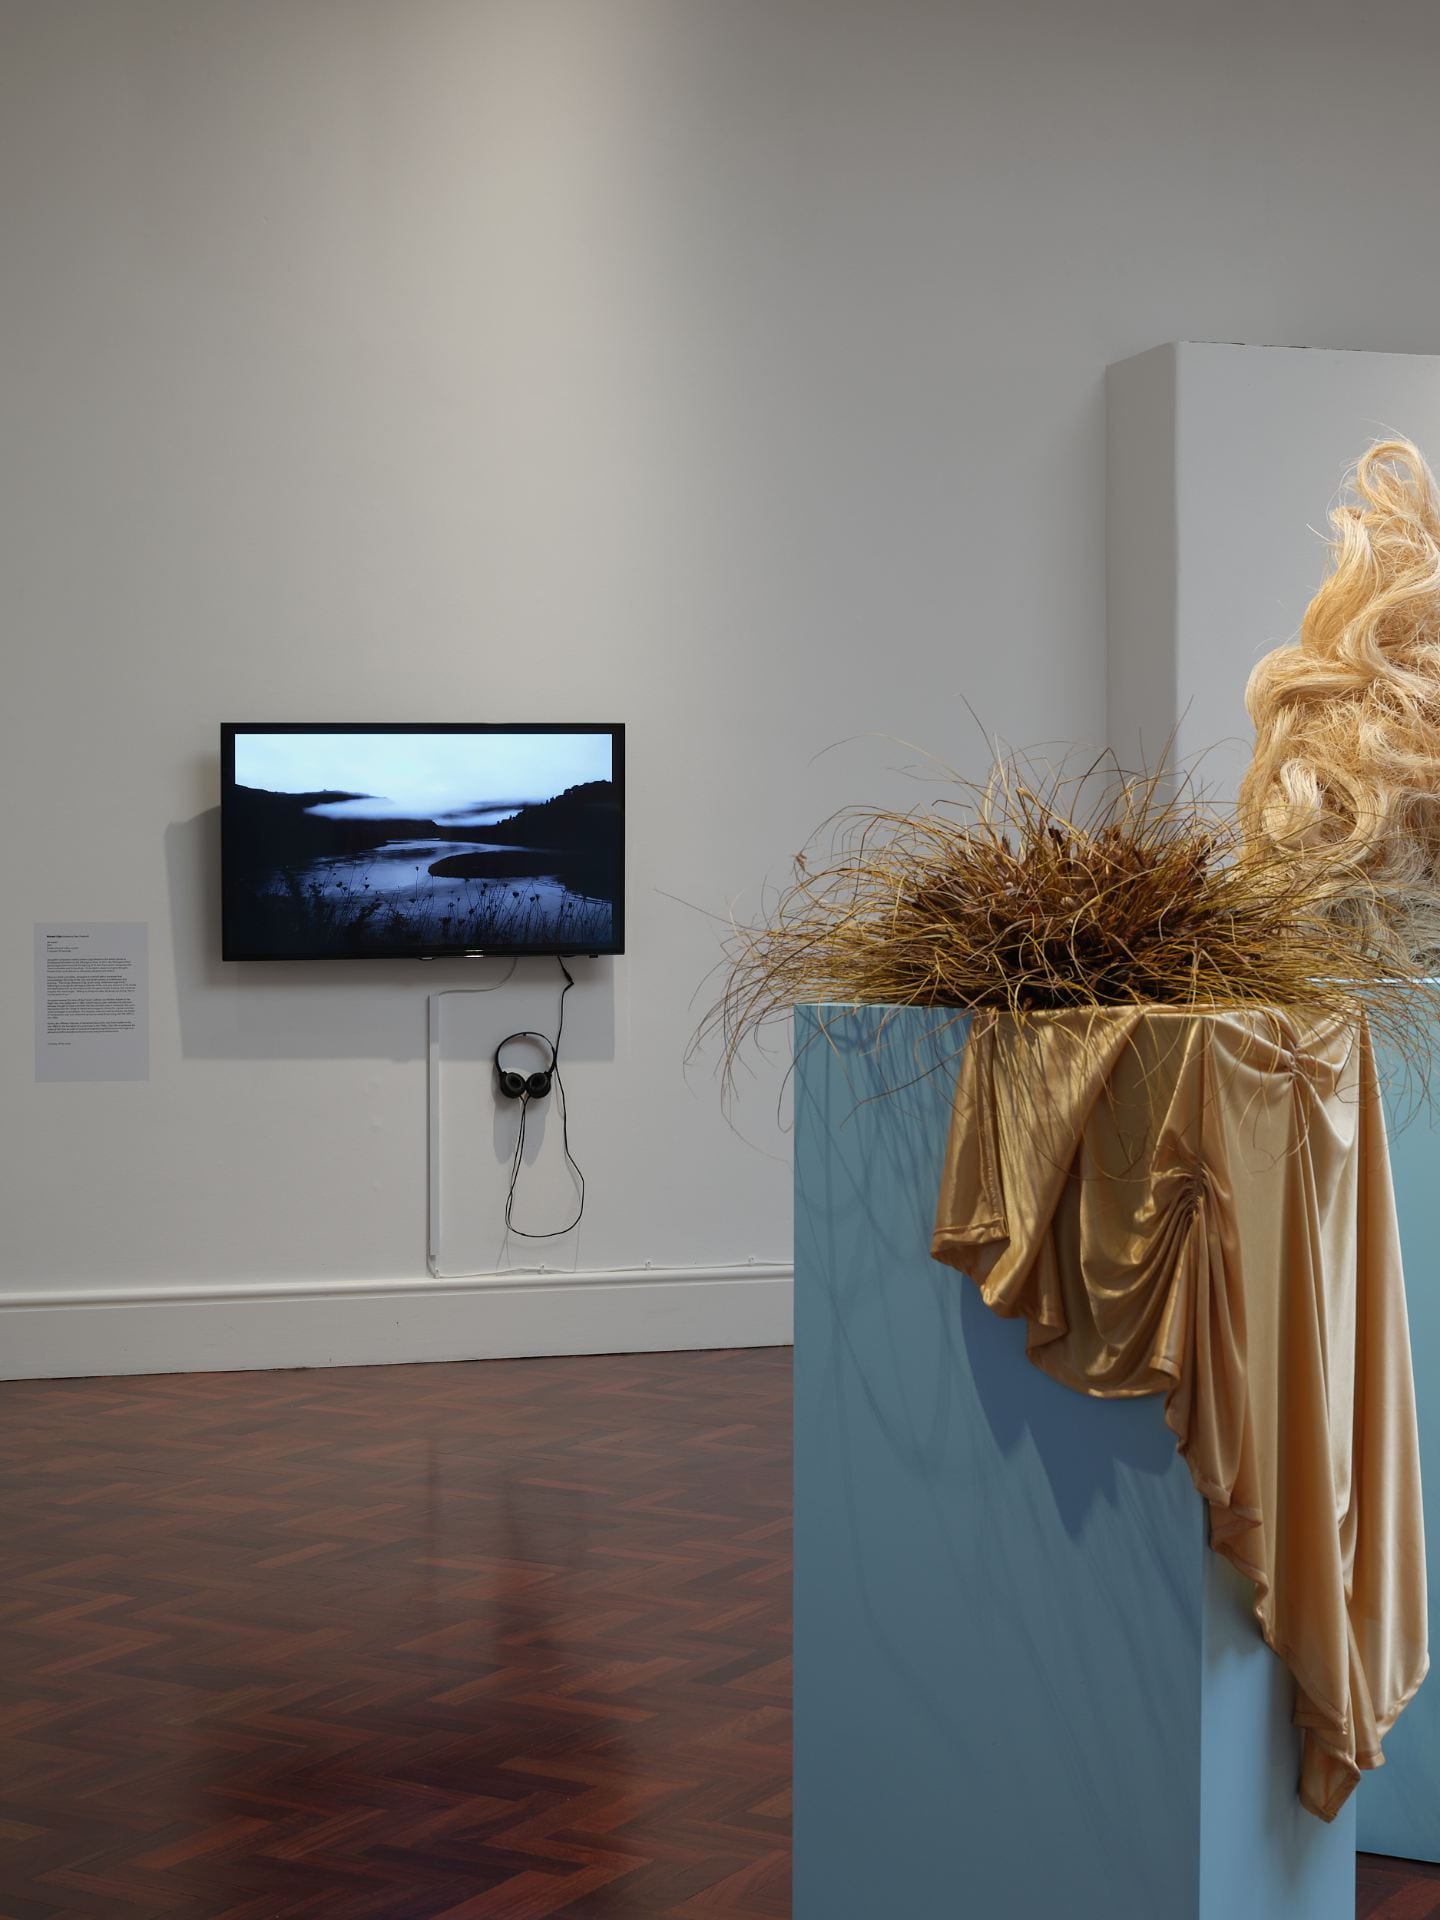 Two plant fibre wigs on pale blue plinths with gold fabric are visible in the foreground. In the background, a TV with a black and white landscape playing on it is mounted on a wall.